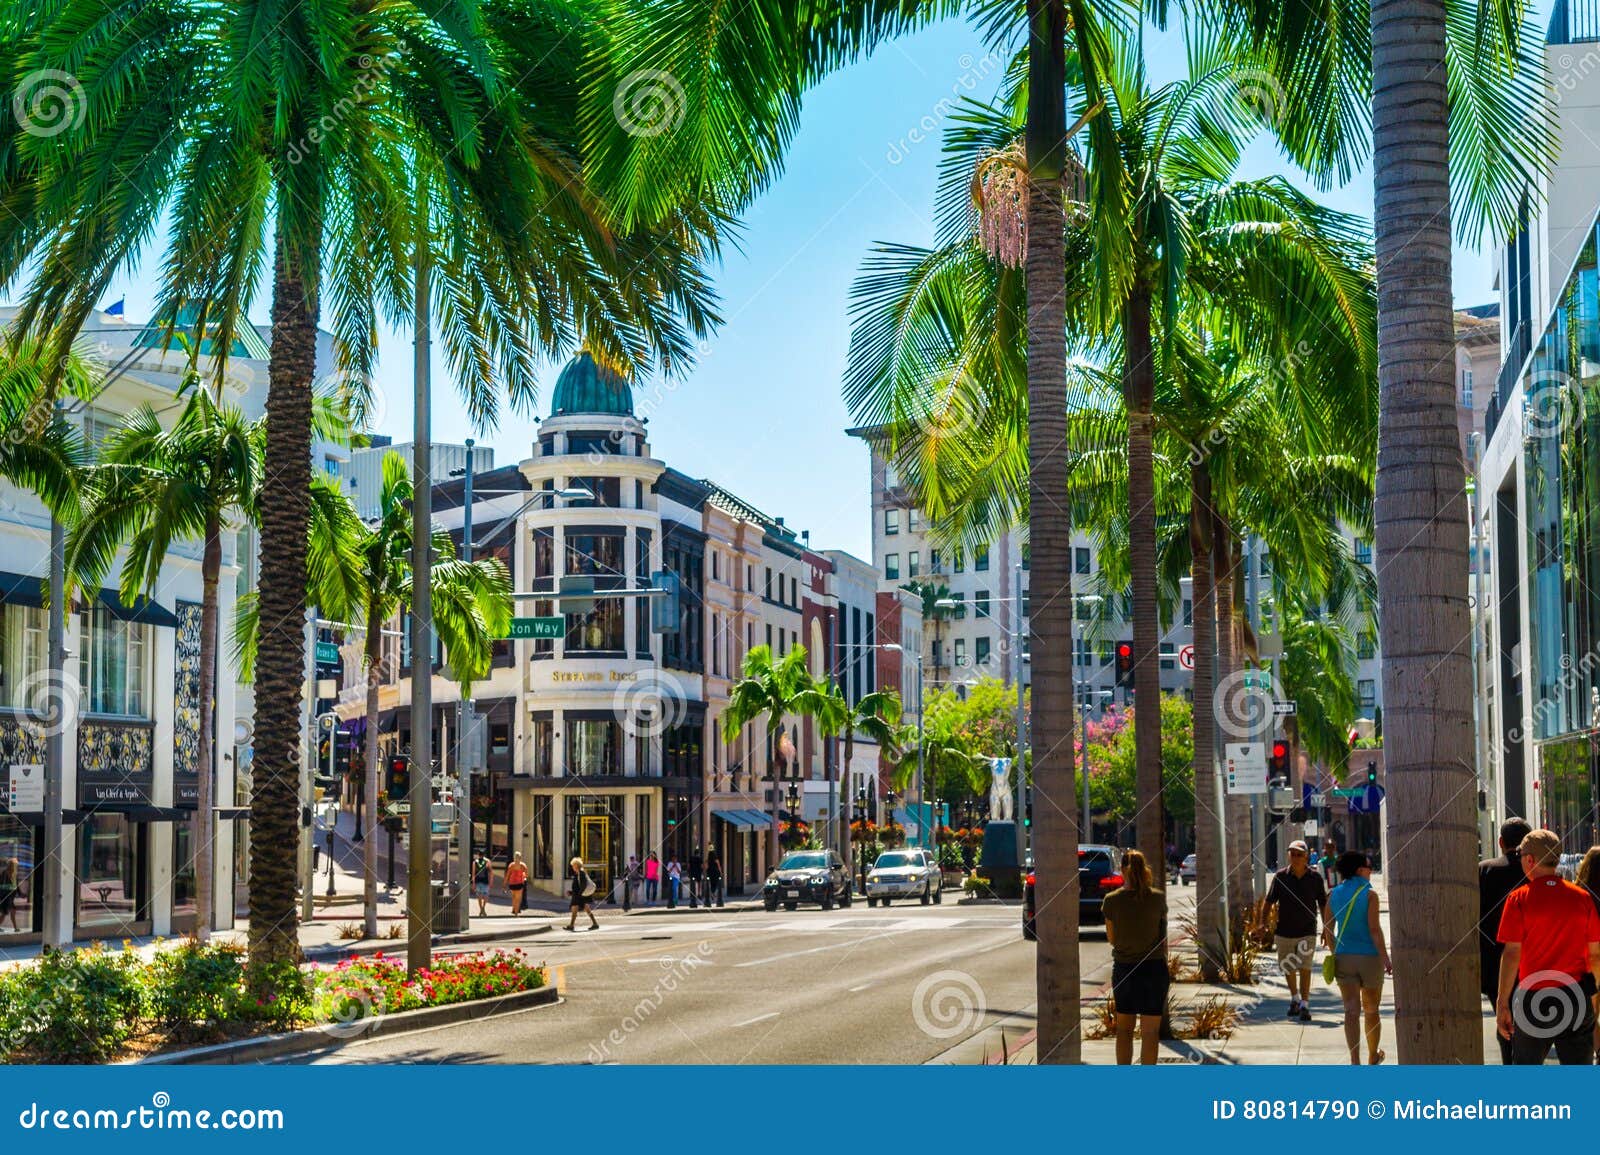 BEVERLY HILLS, CA/USA - OCTOBER 29, 2019: The distinctive Louis Vuitton  store on Rodeo Drive in Beverly Hills, one of the most expensive shopping  dist Stock Photo - Alamy